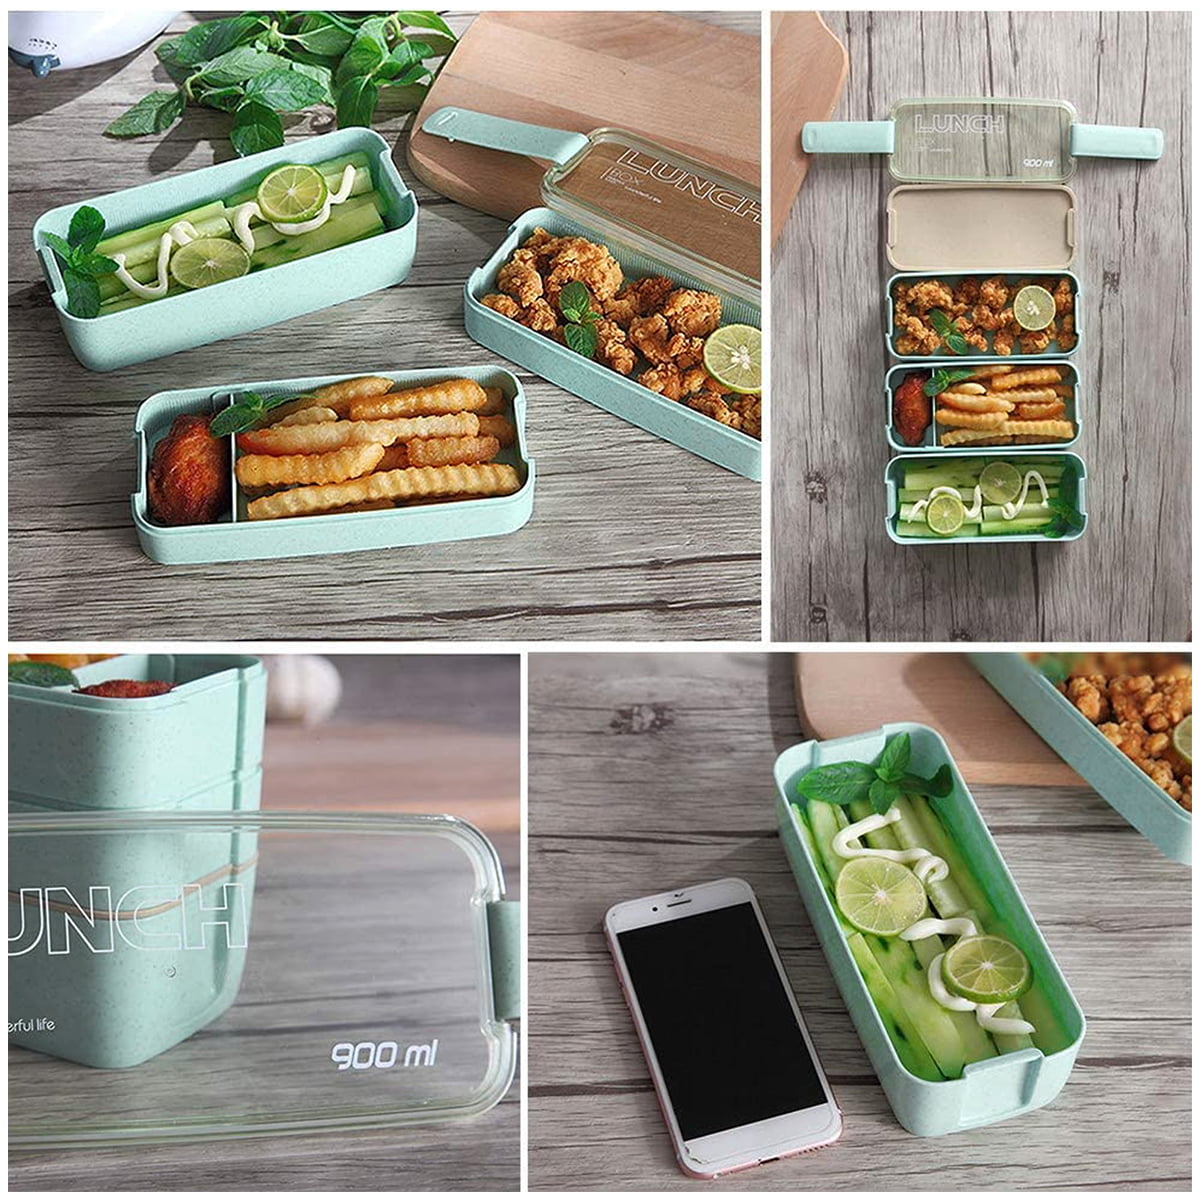  Iteryn Stackable Bento Box with Lunch Bag, 3 Compartment Japanese  Lunch Containers, Wheat Straw, All-in-1 Bento Lunch Box Kit for Adult Meal  Prep Lunch Snack: Home & Kitchen